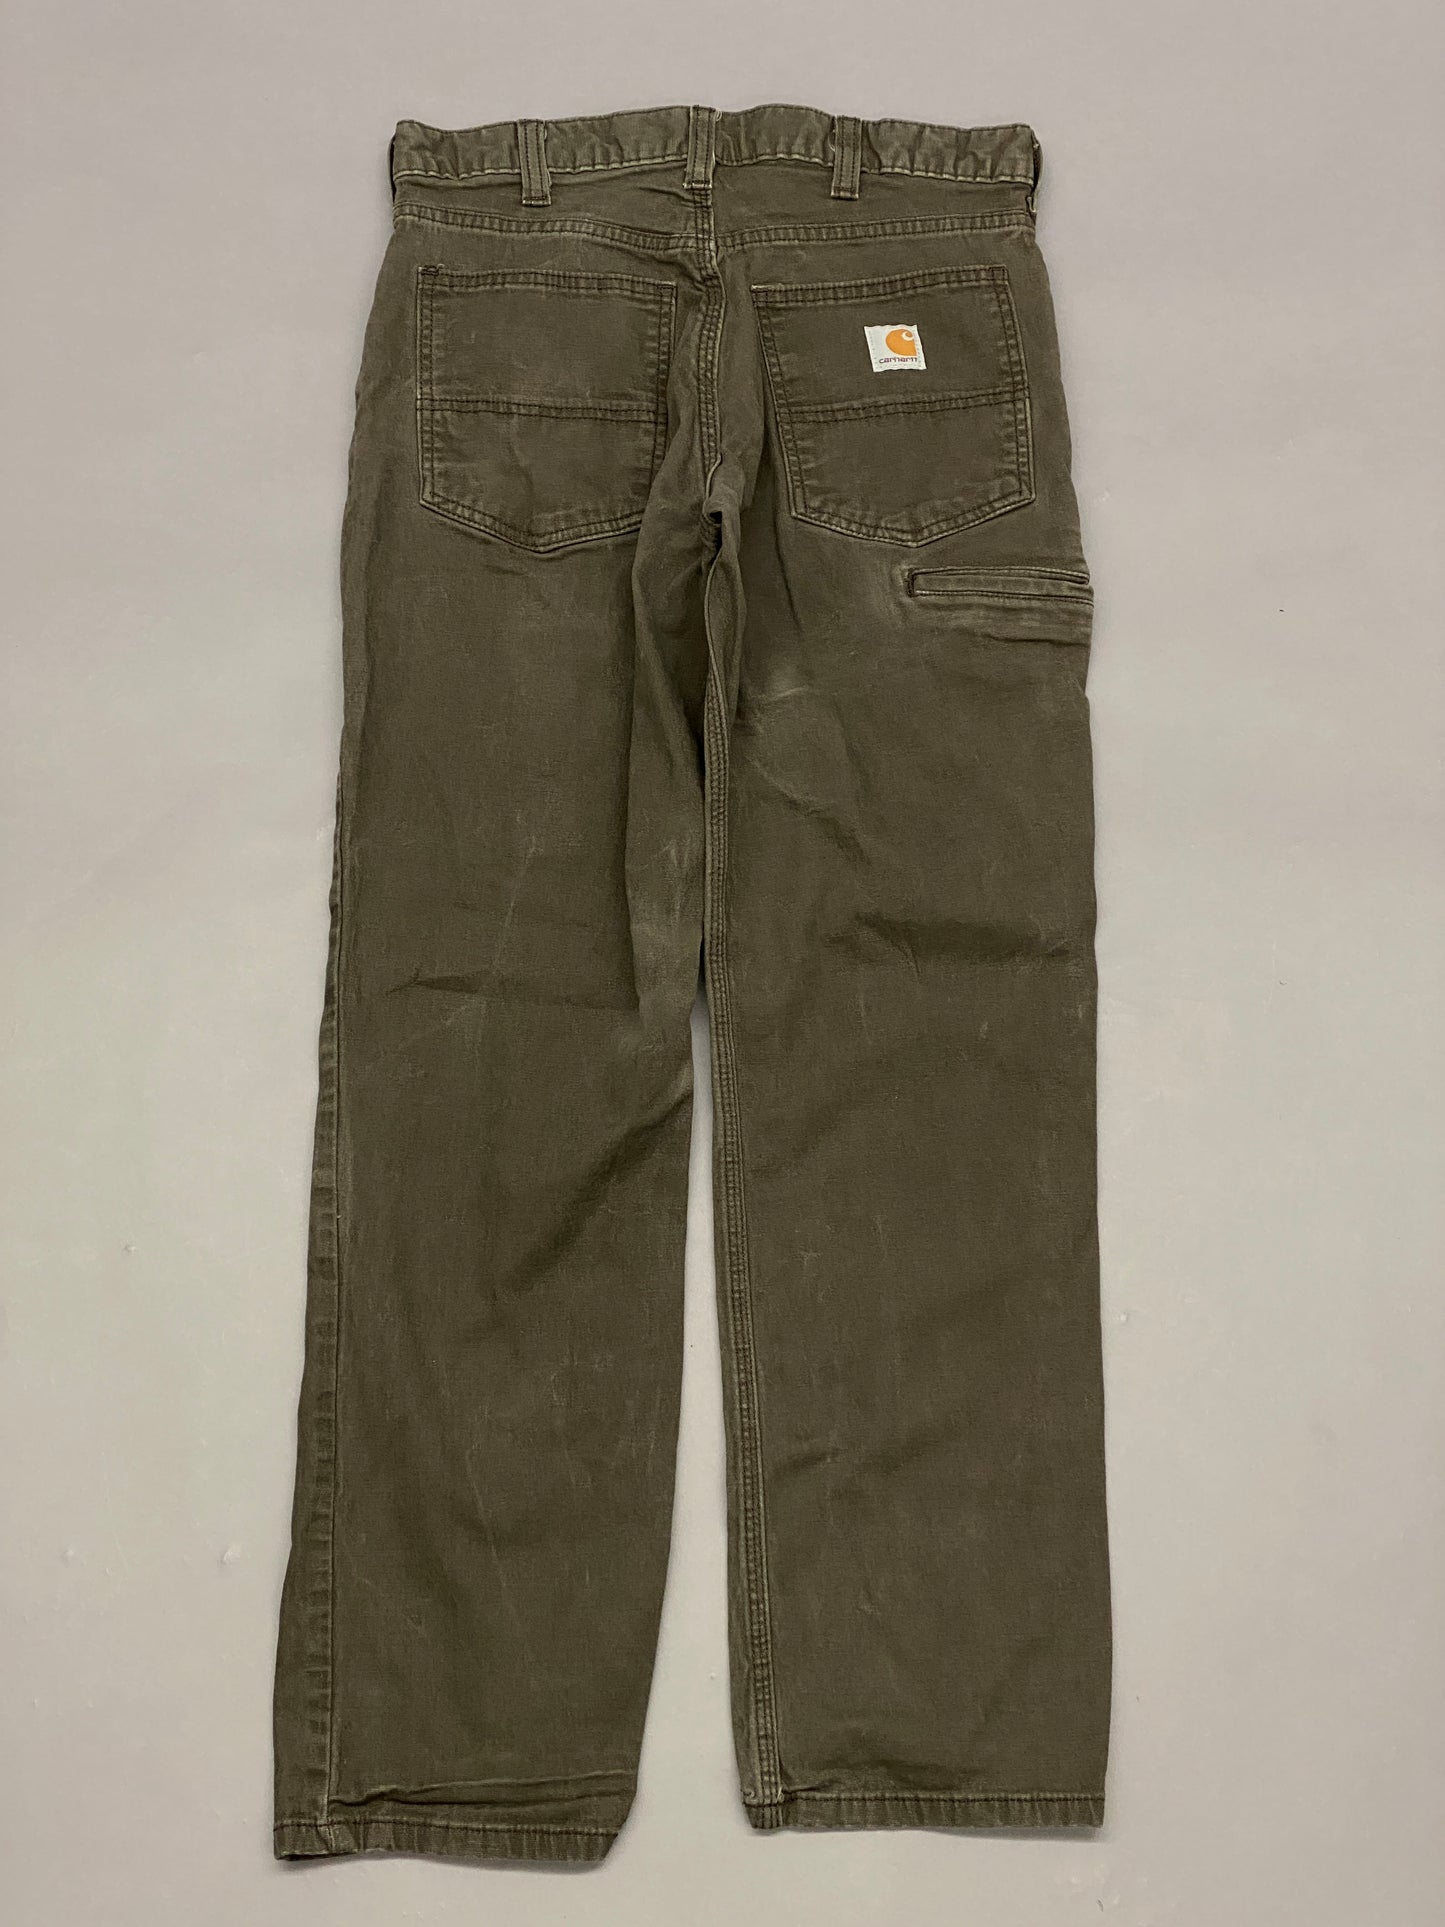 Carhartt Relaxed Fit Pants - 32 x 30